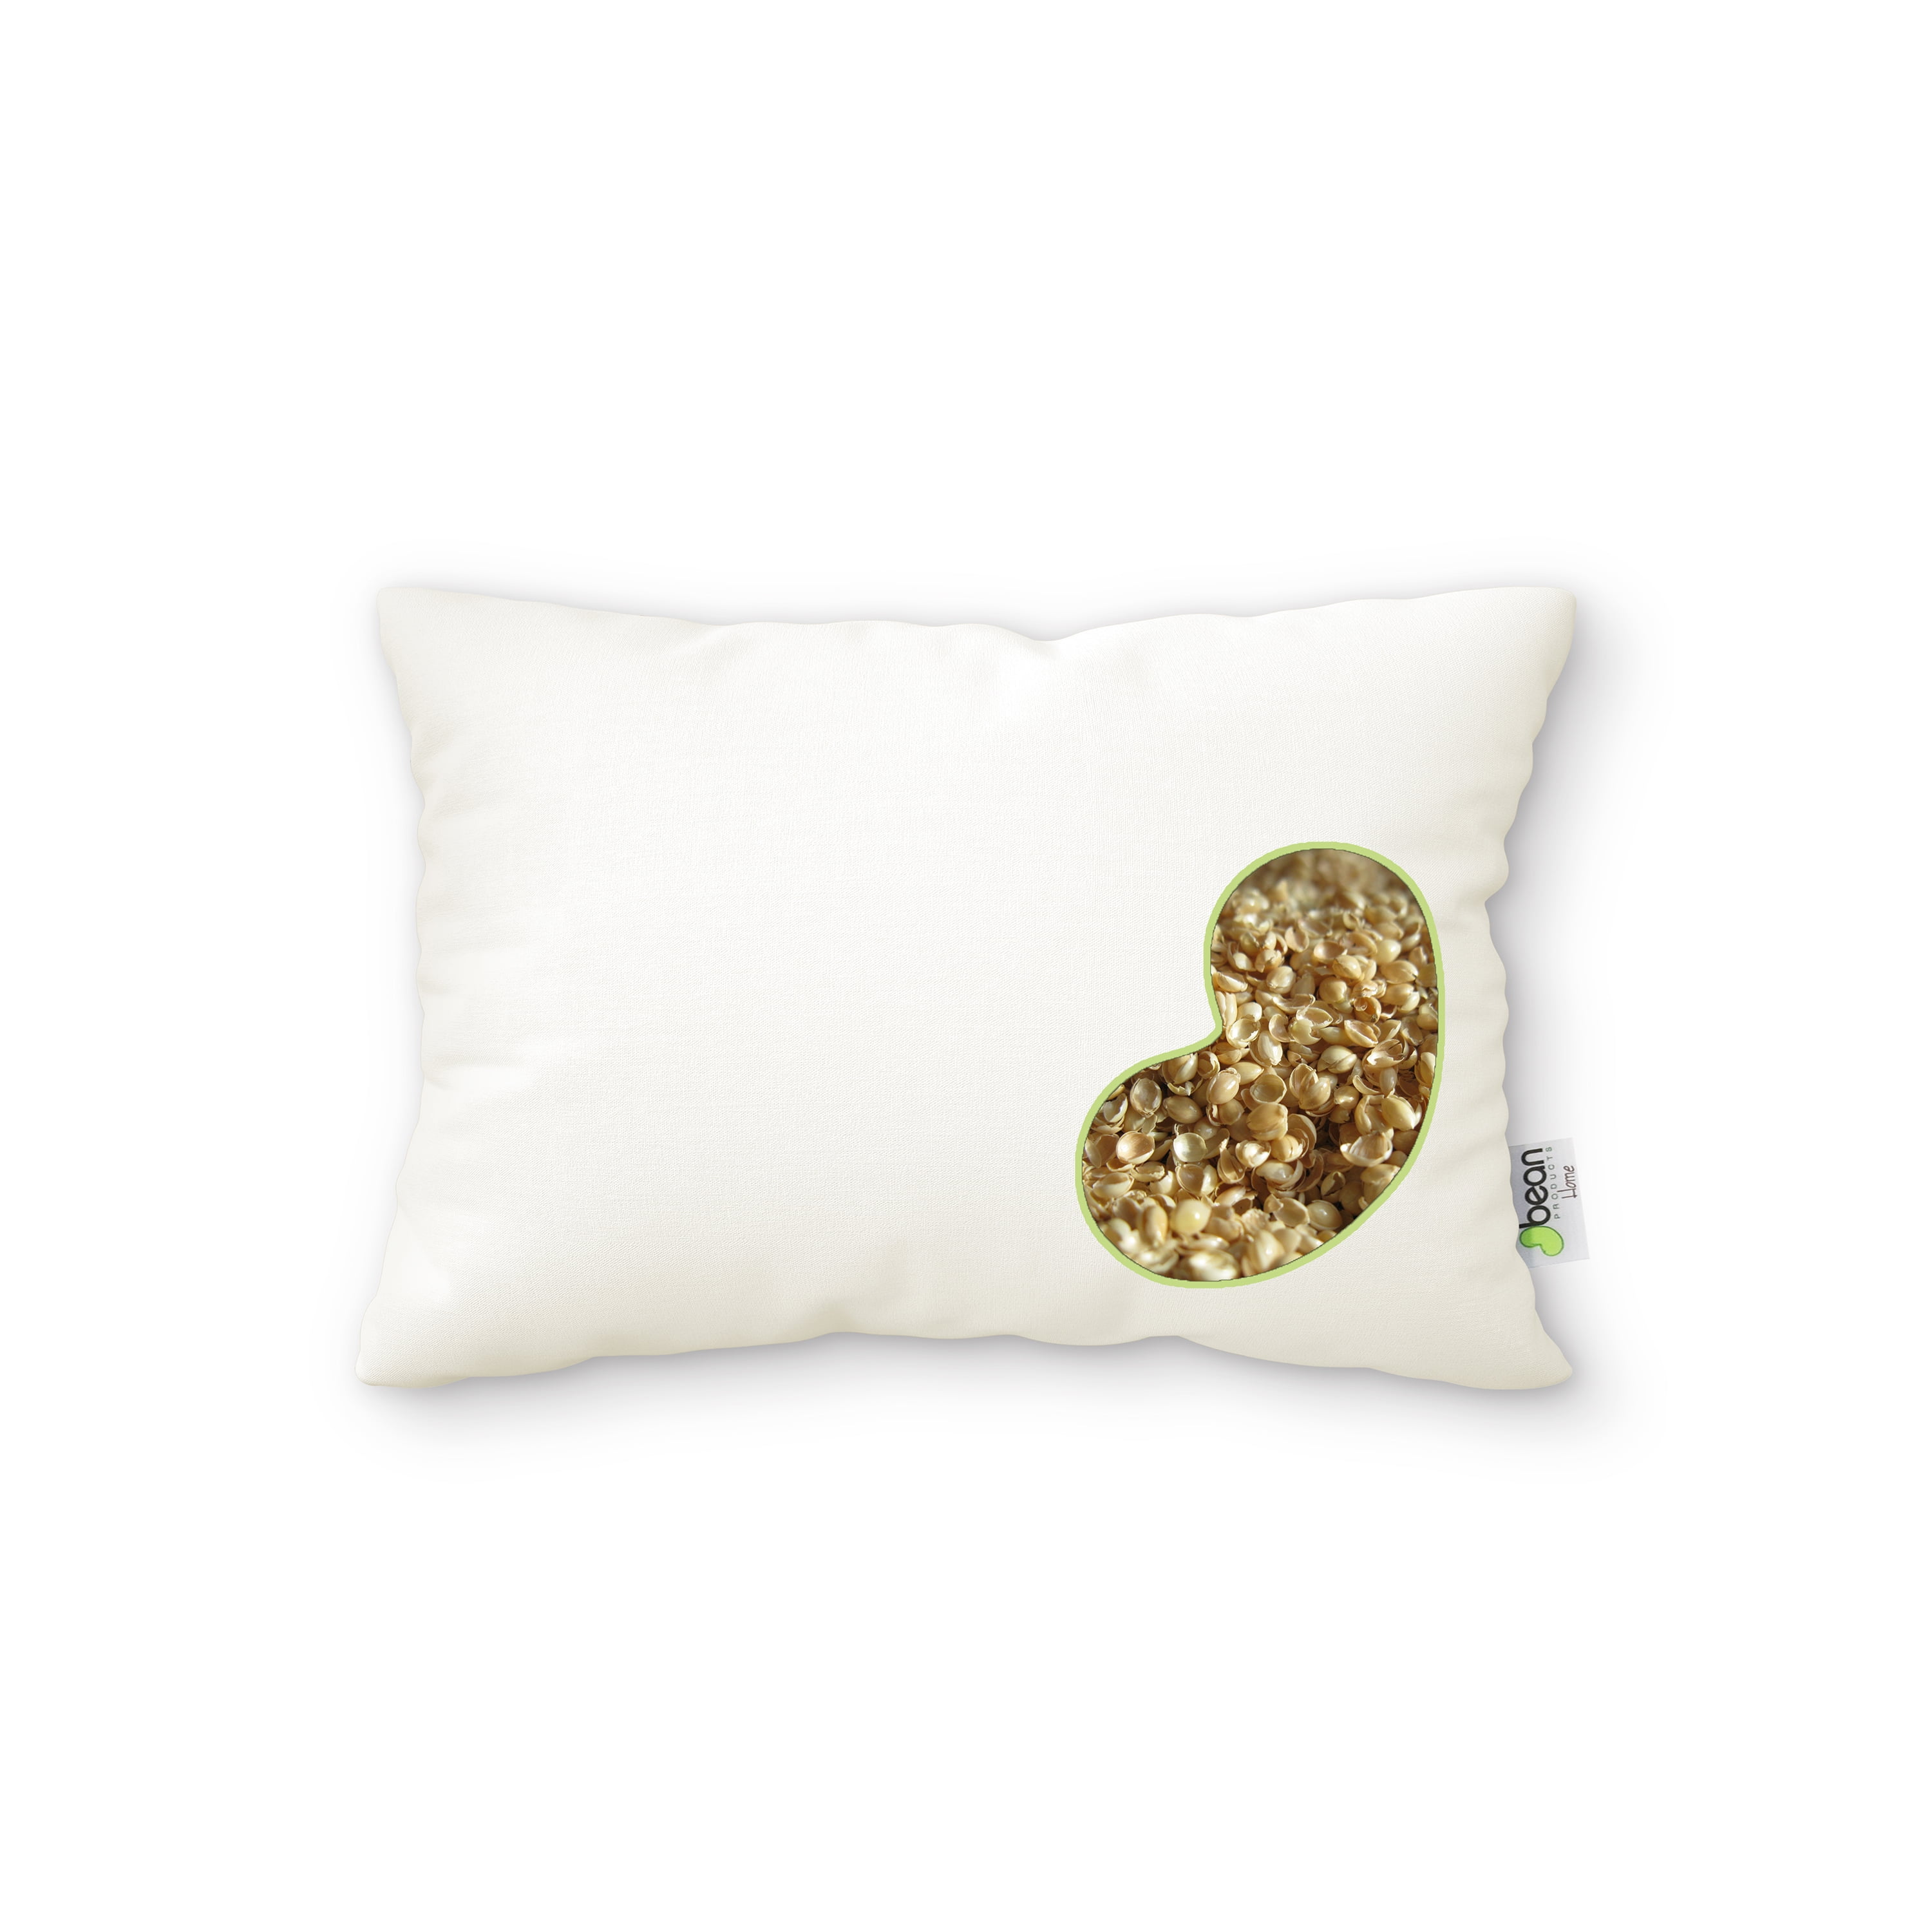 Millet Hull Pillow, Wheat Hull Pillow by WheatDreamz Travel / Toddler 13 x 18 / Millet / Organic Natural